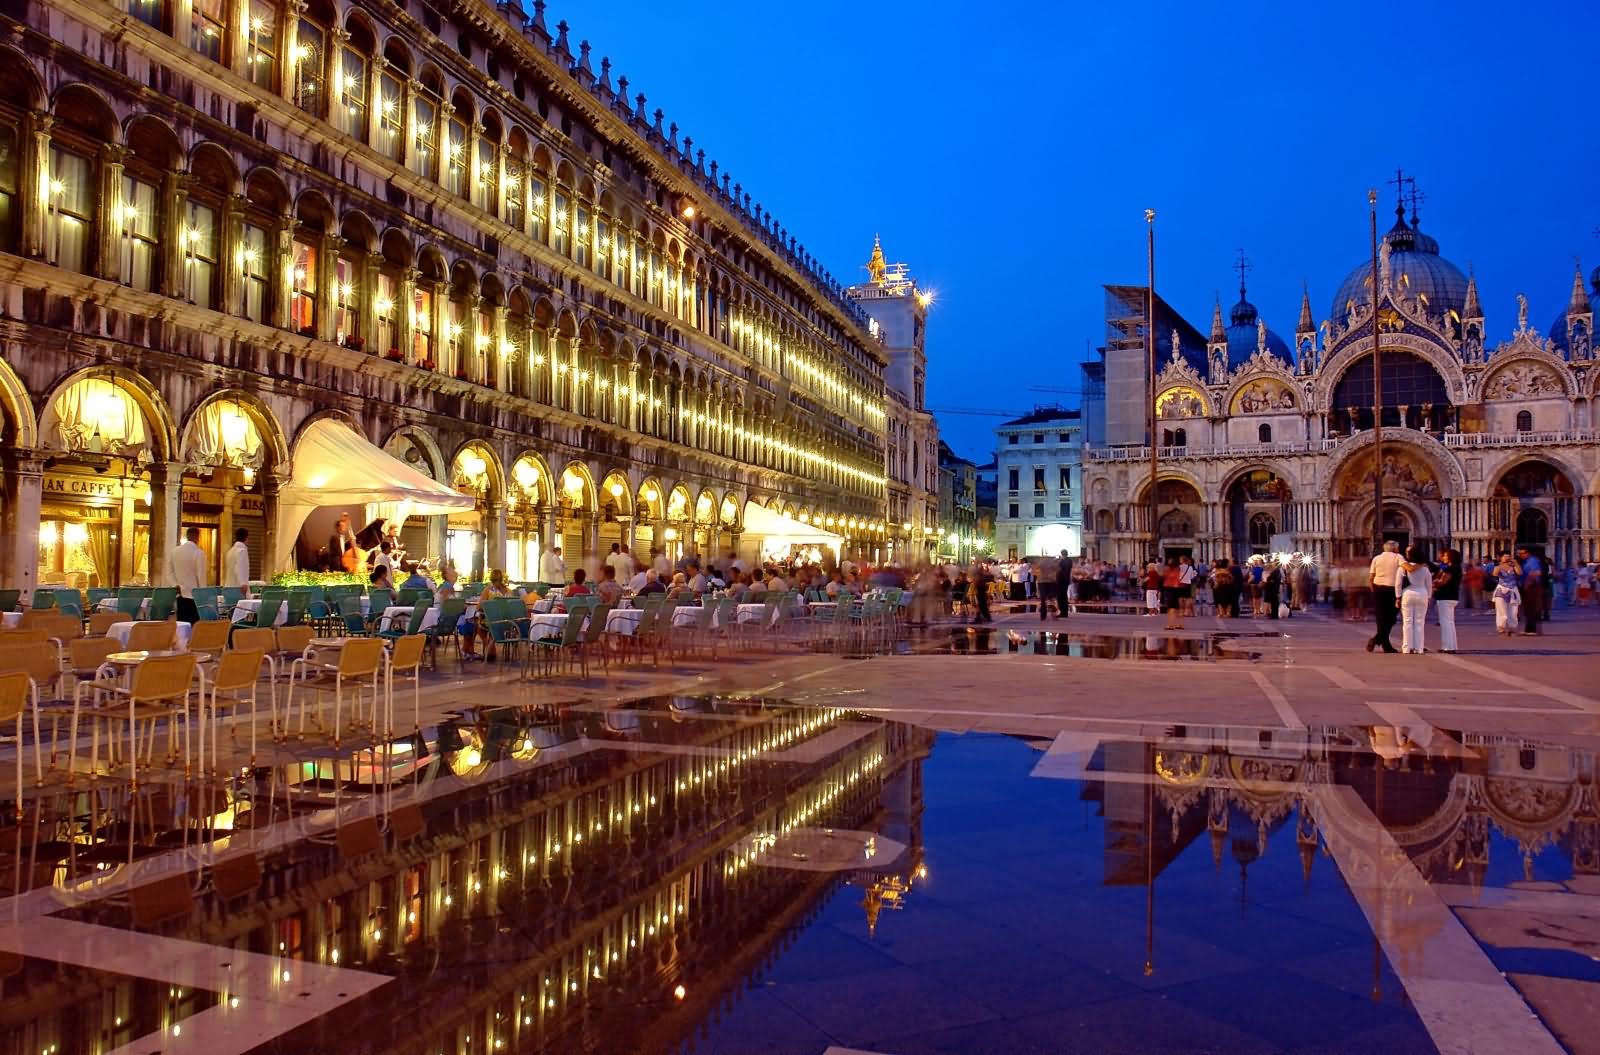 Adorable Night View Of The Piazza San Marco